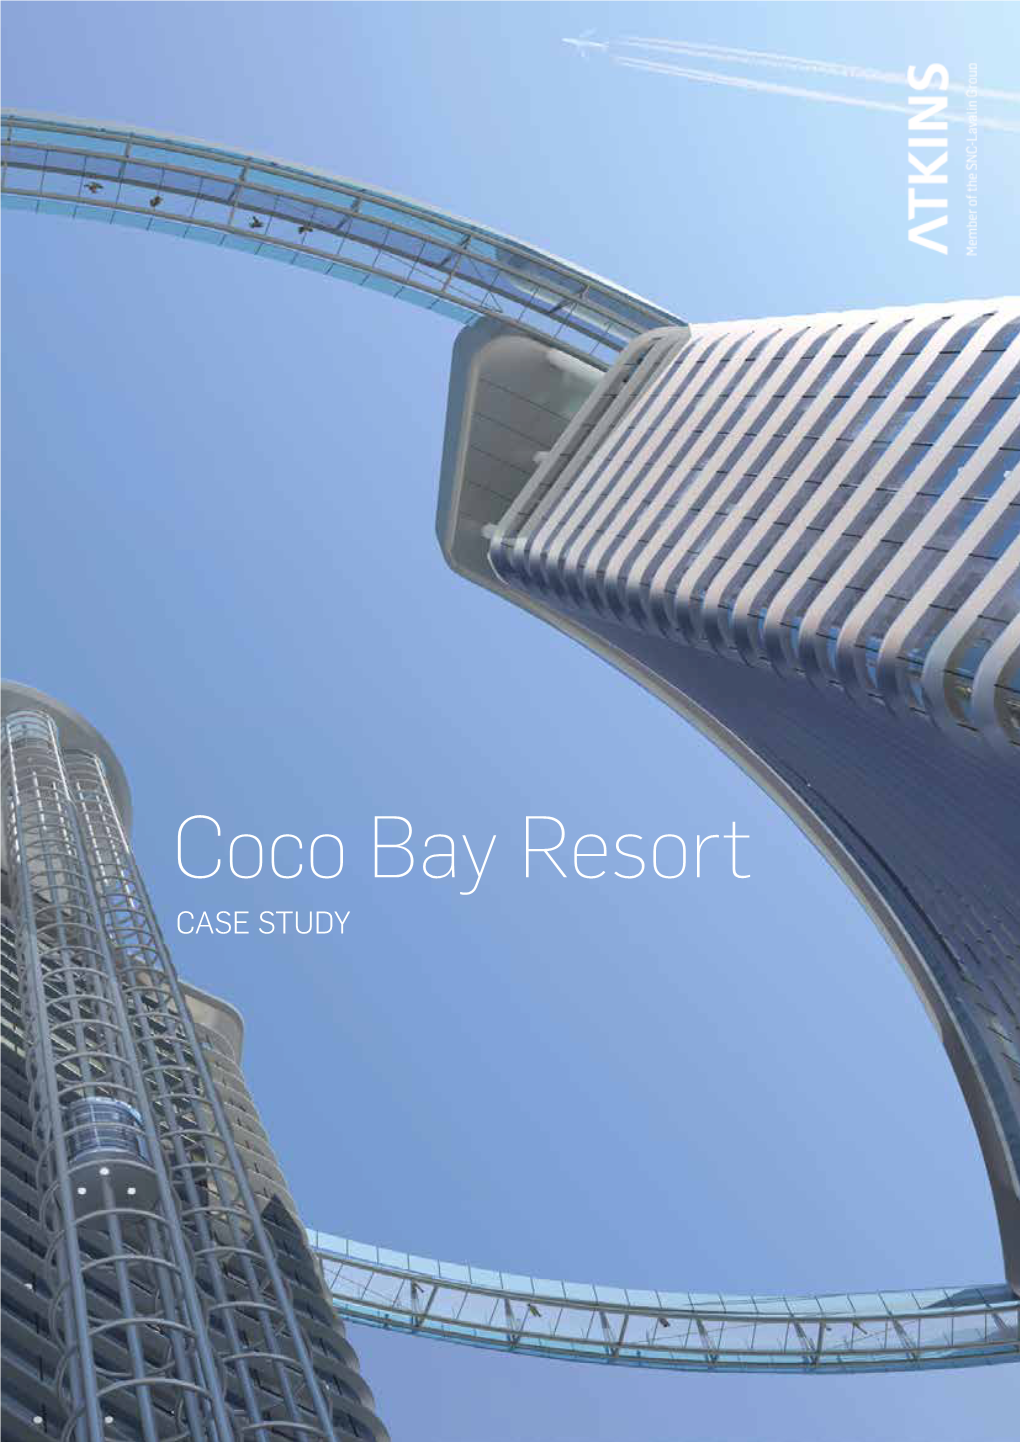 Cocobay Beach Luxury Hotel Is Located on the Prime Location Directly on the Beach